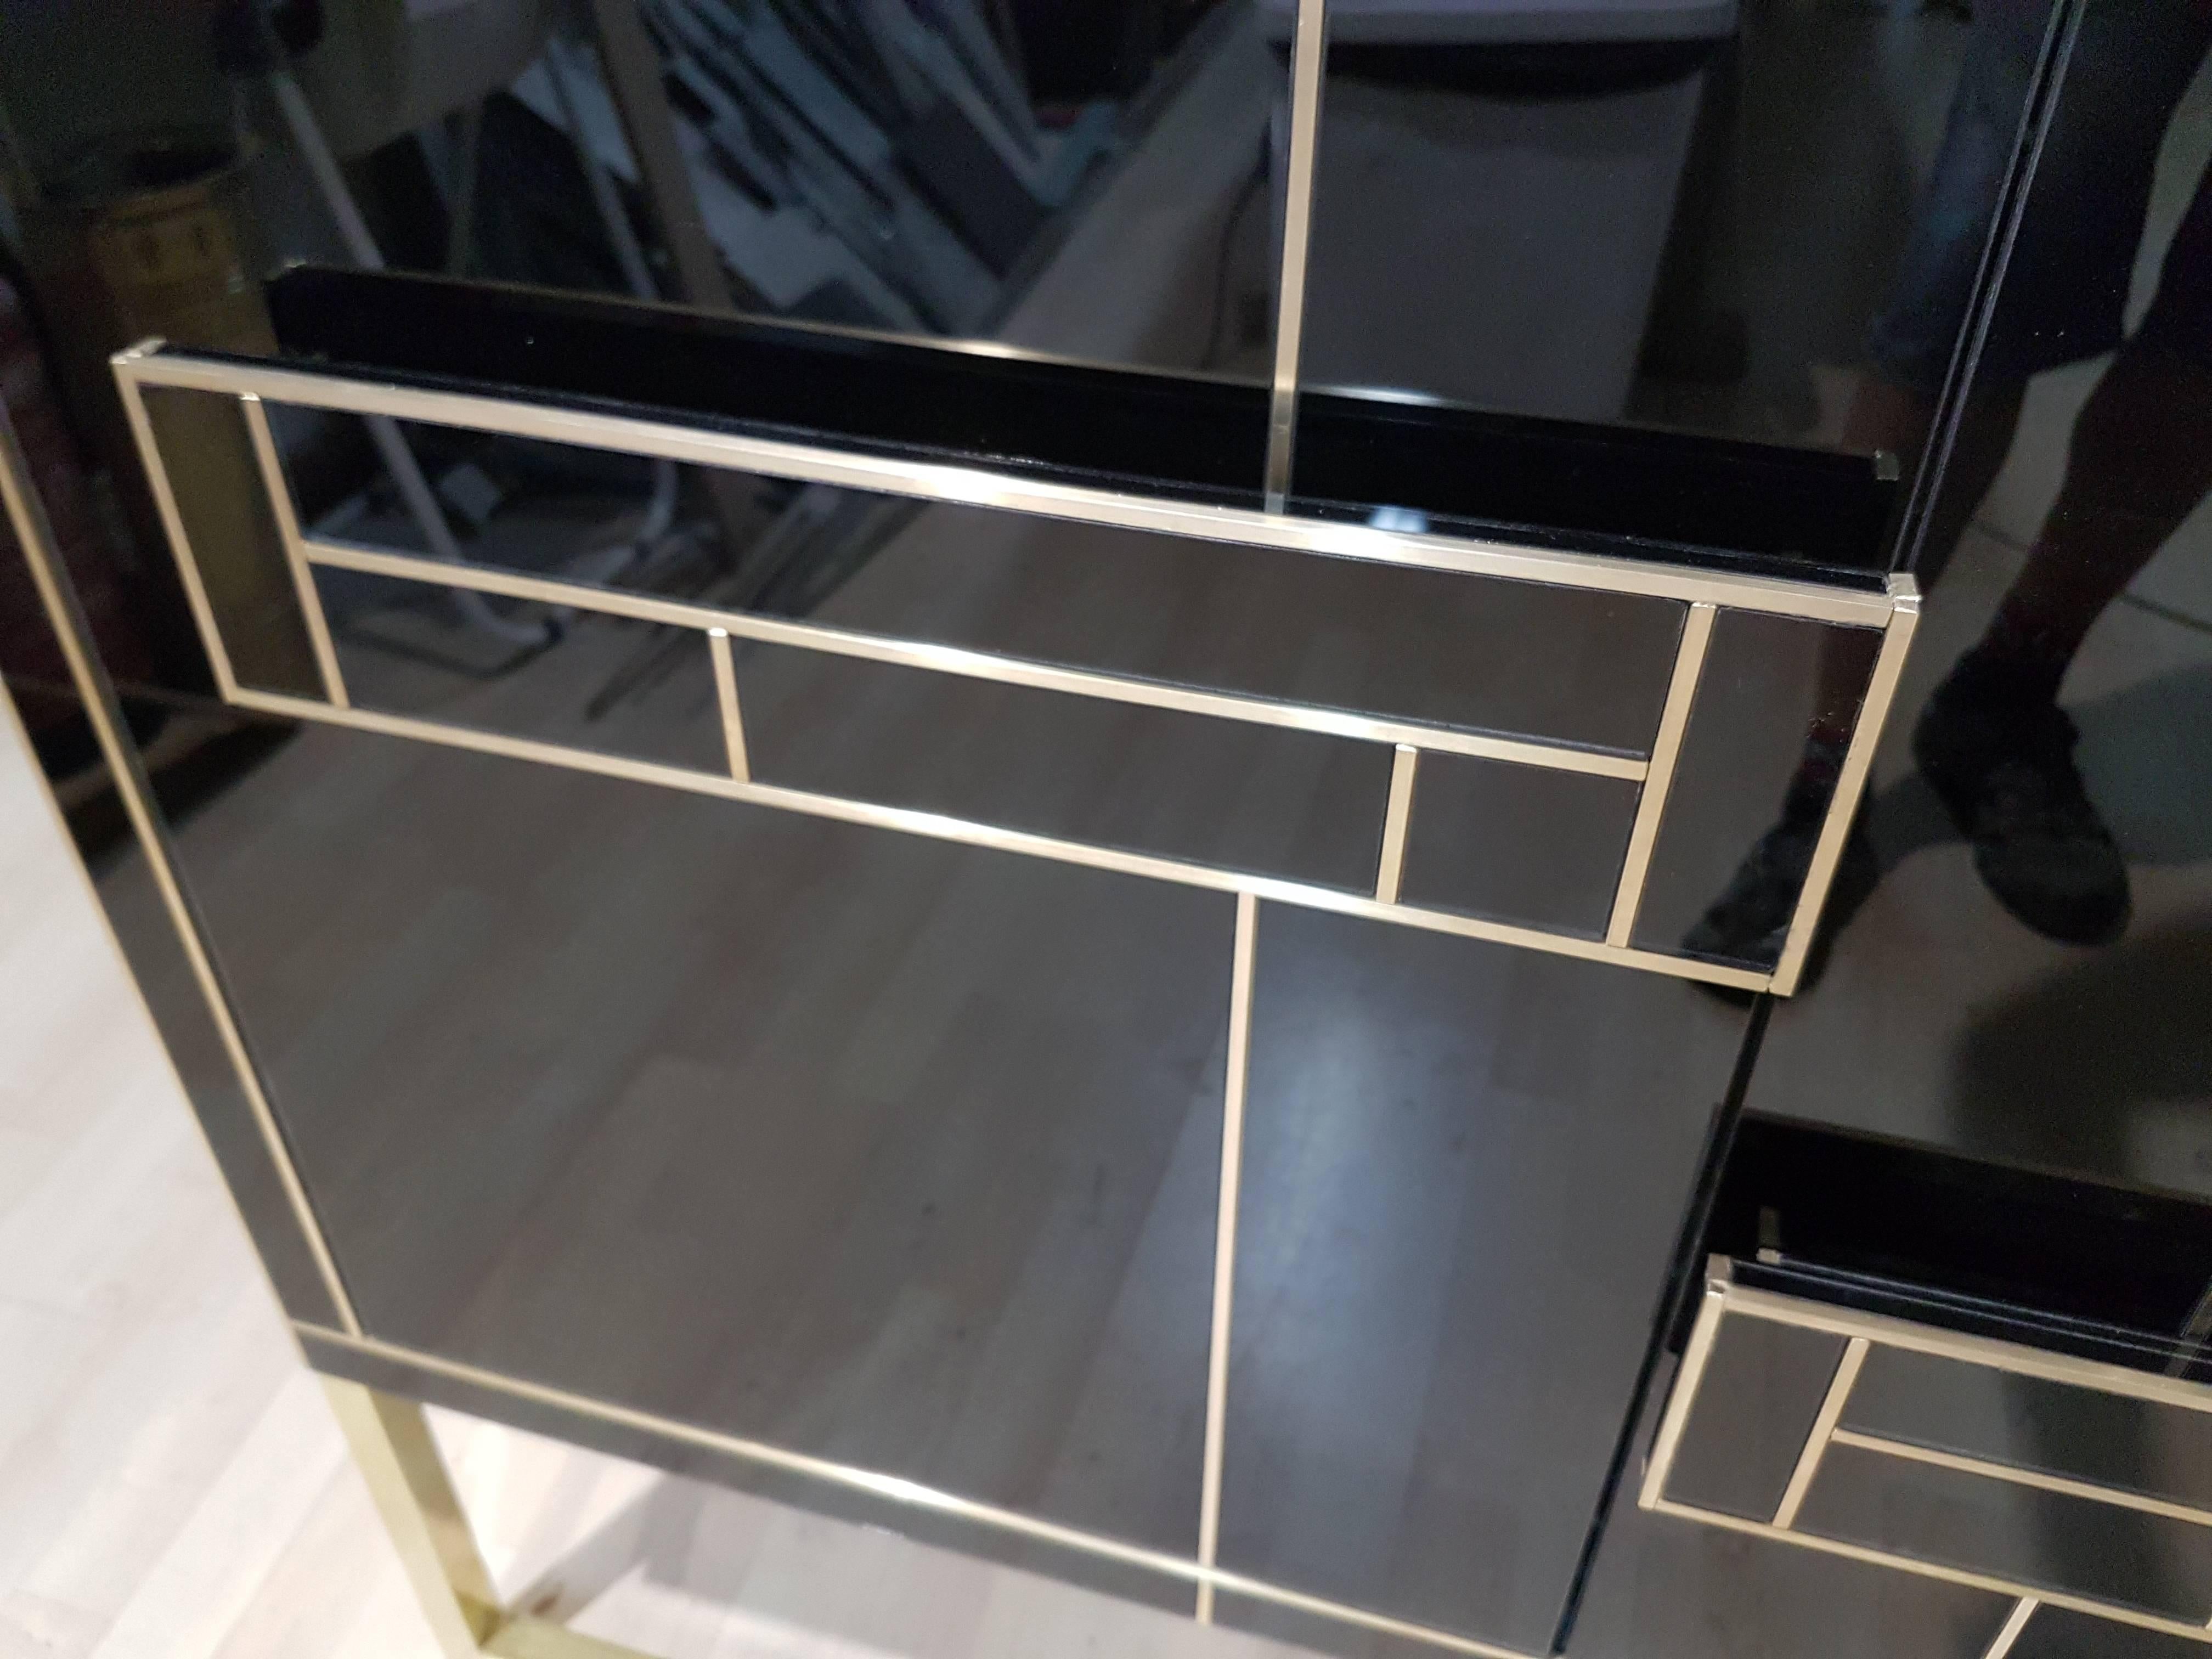 Elegant and timeless pair of black onyx glass cabinets with brass flat bar legs and brass inlays. Interior is plated in mirrors. Handcrafted in Spain exclusively for us. An exquisite work of art. Signed by artist/maker. These cabinets are versatile